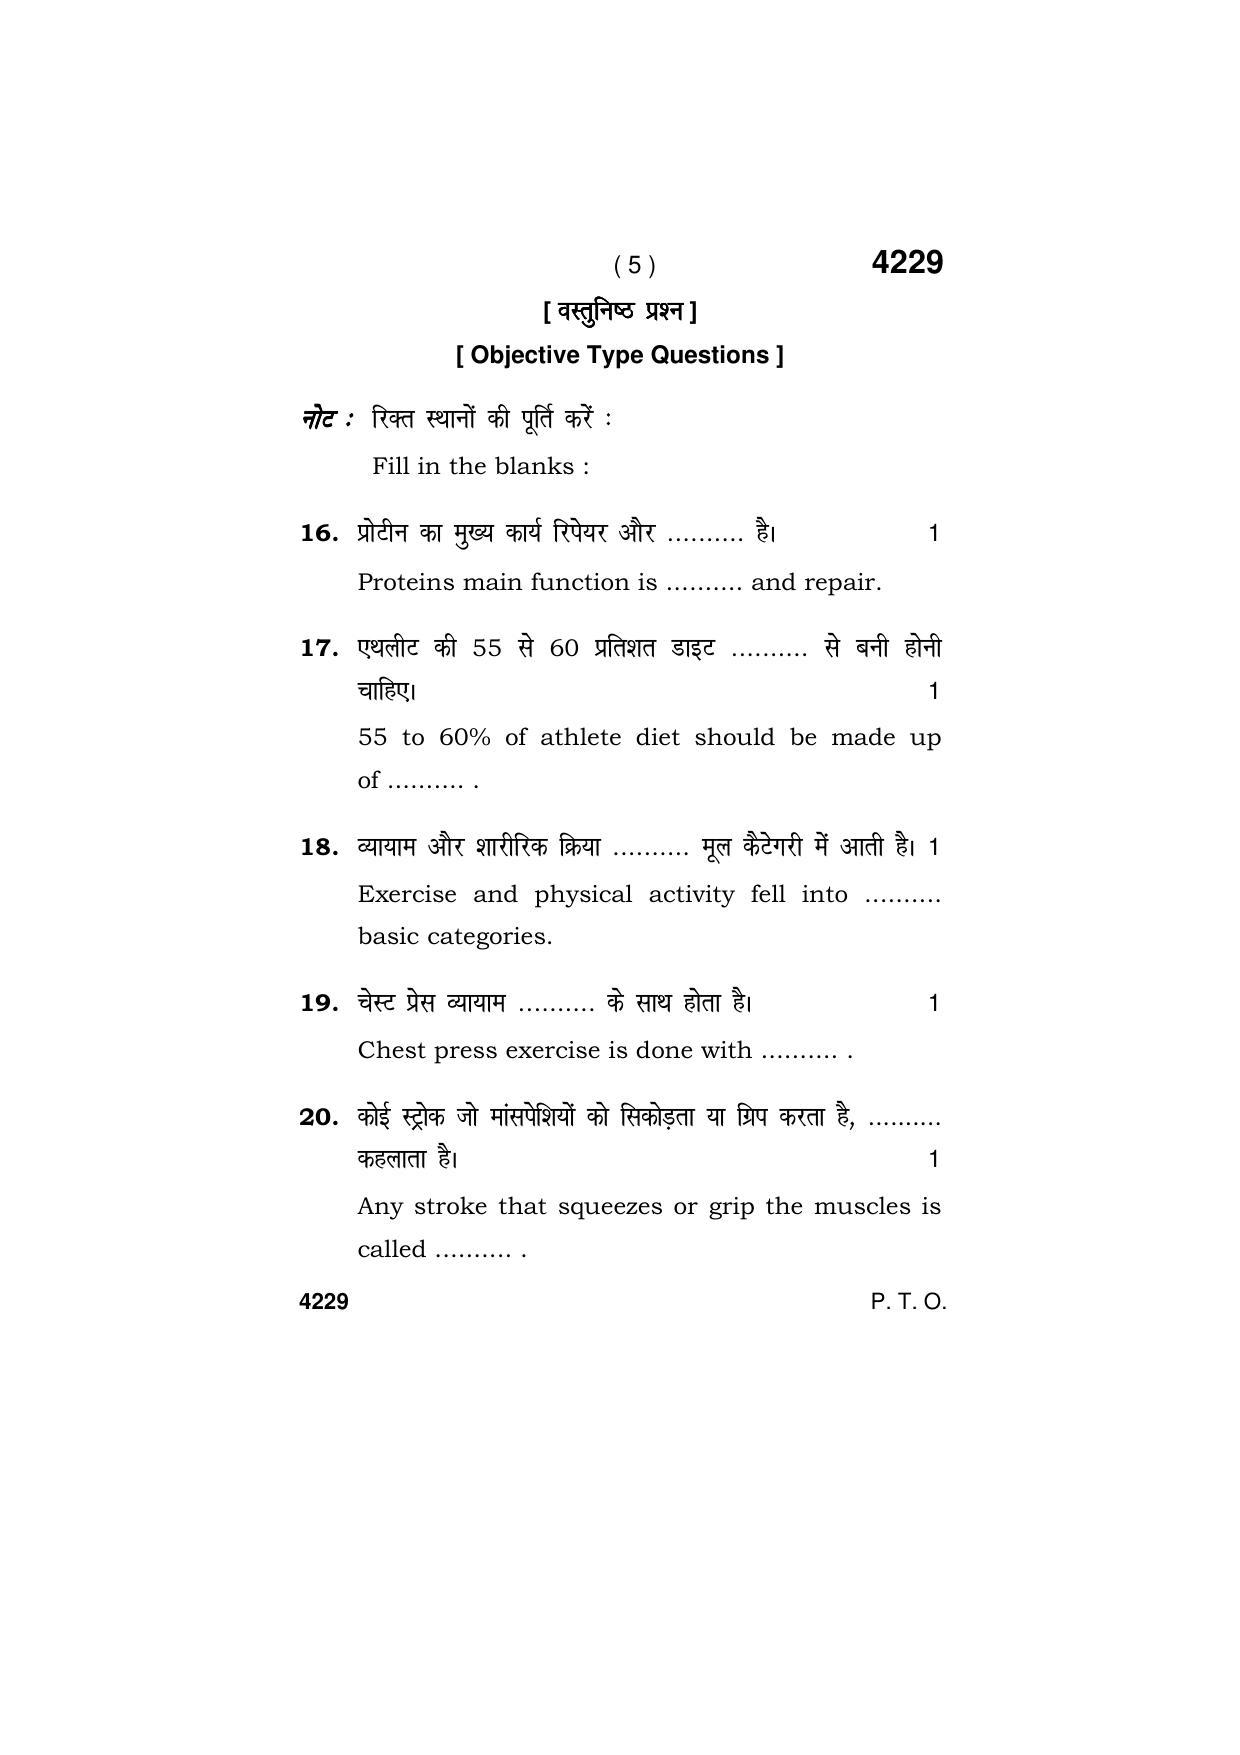 Haryana Board HBSE Class 10 Beauty & Wellness 2019 Question Paper - Page 5